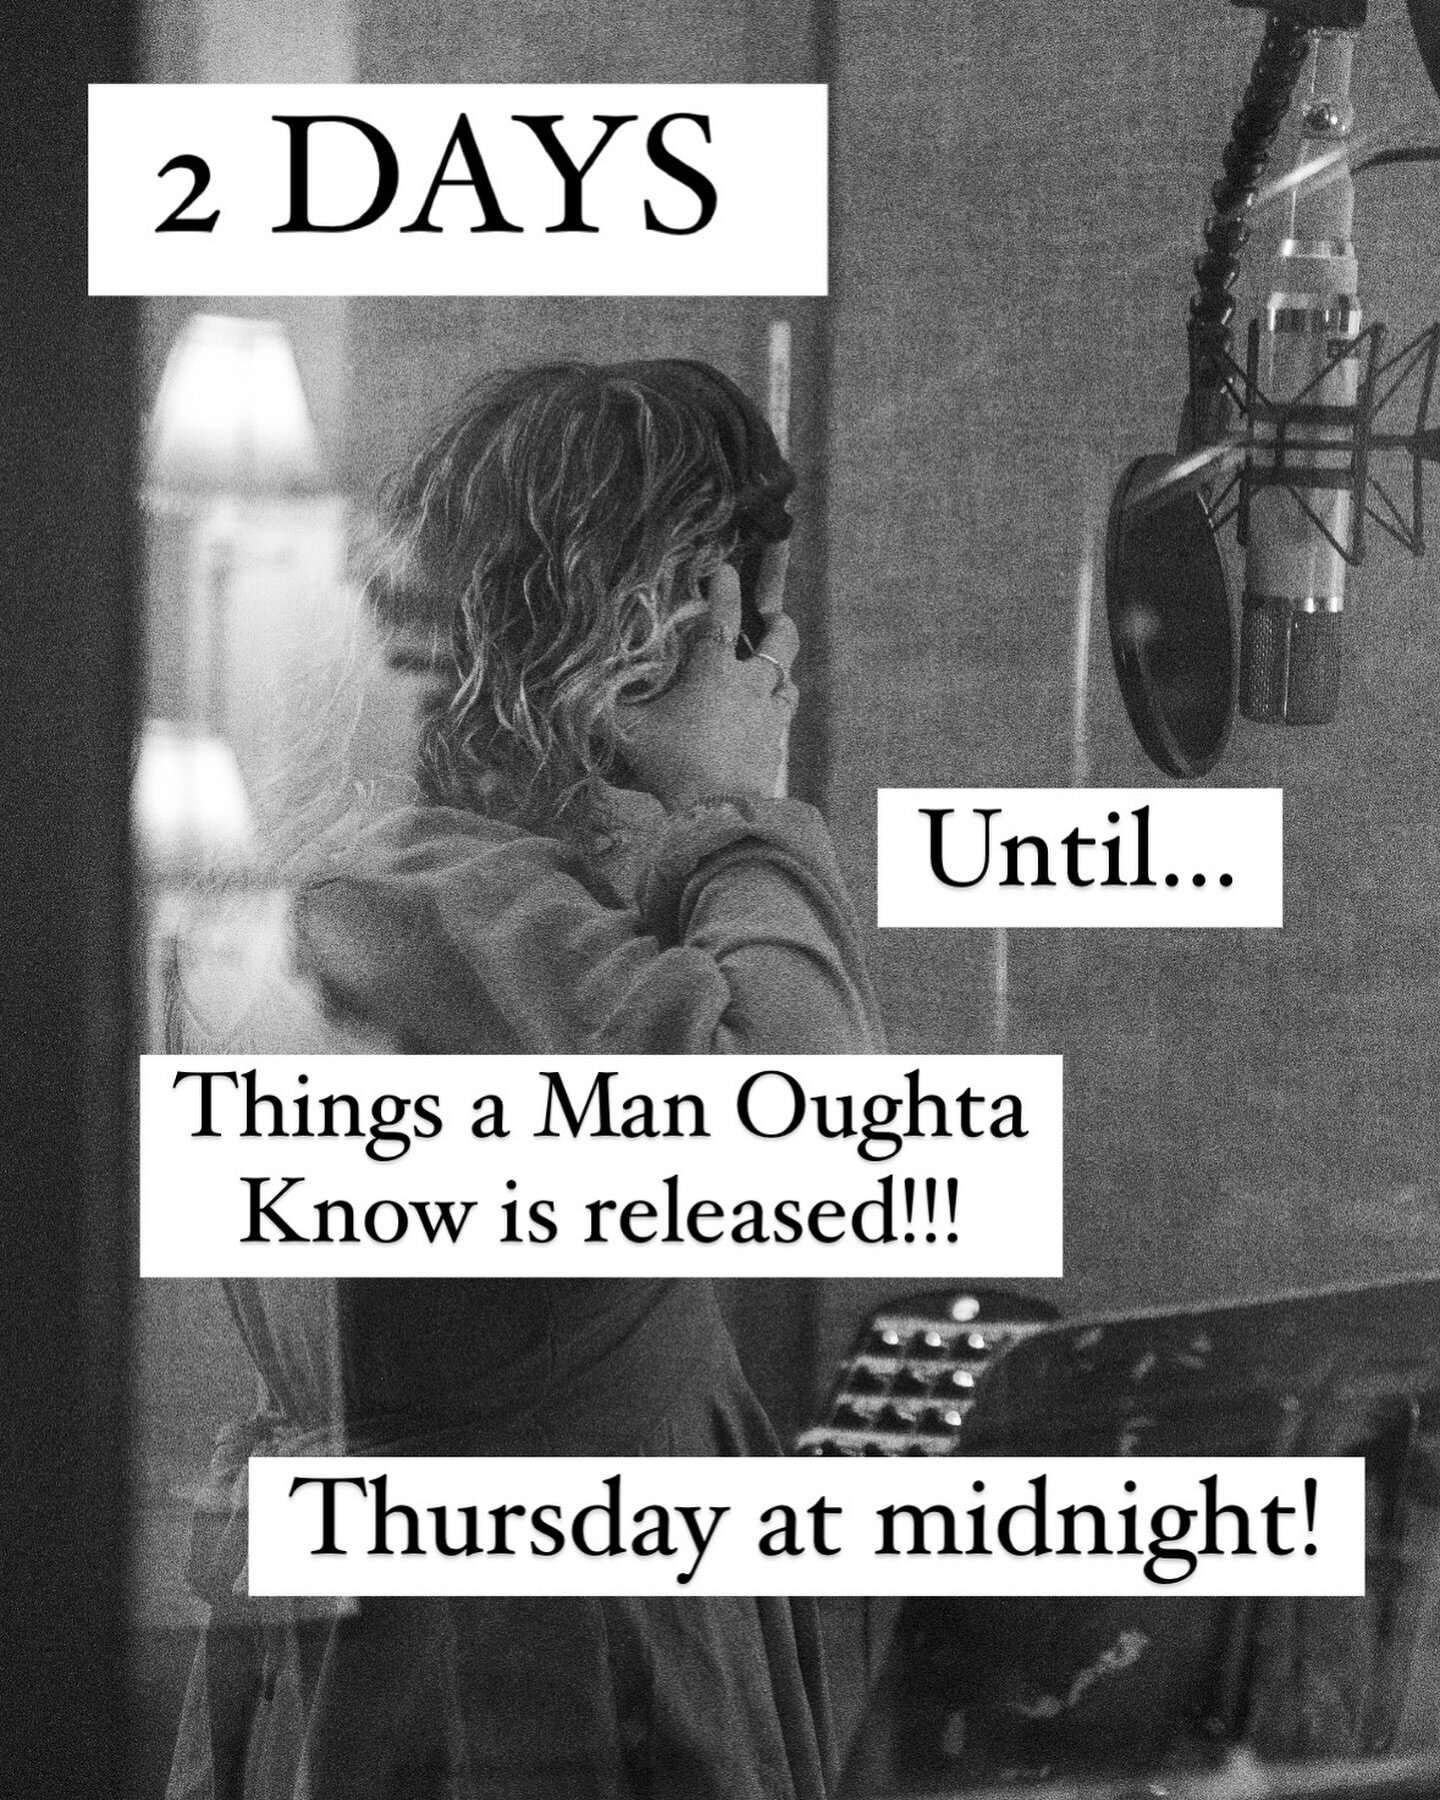 2 DAYS!!! Stay tuned for Thursday at midnight! So excited🤍 #HKR #thingsamanoughtaknow #laineywilson #newmusic